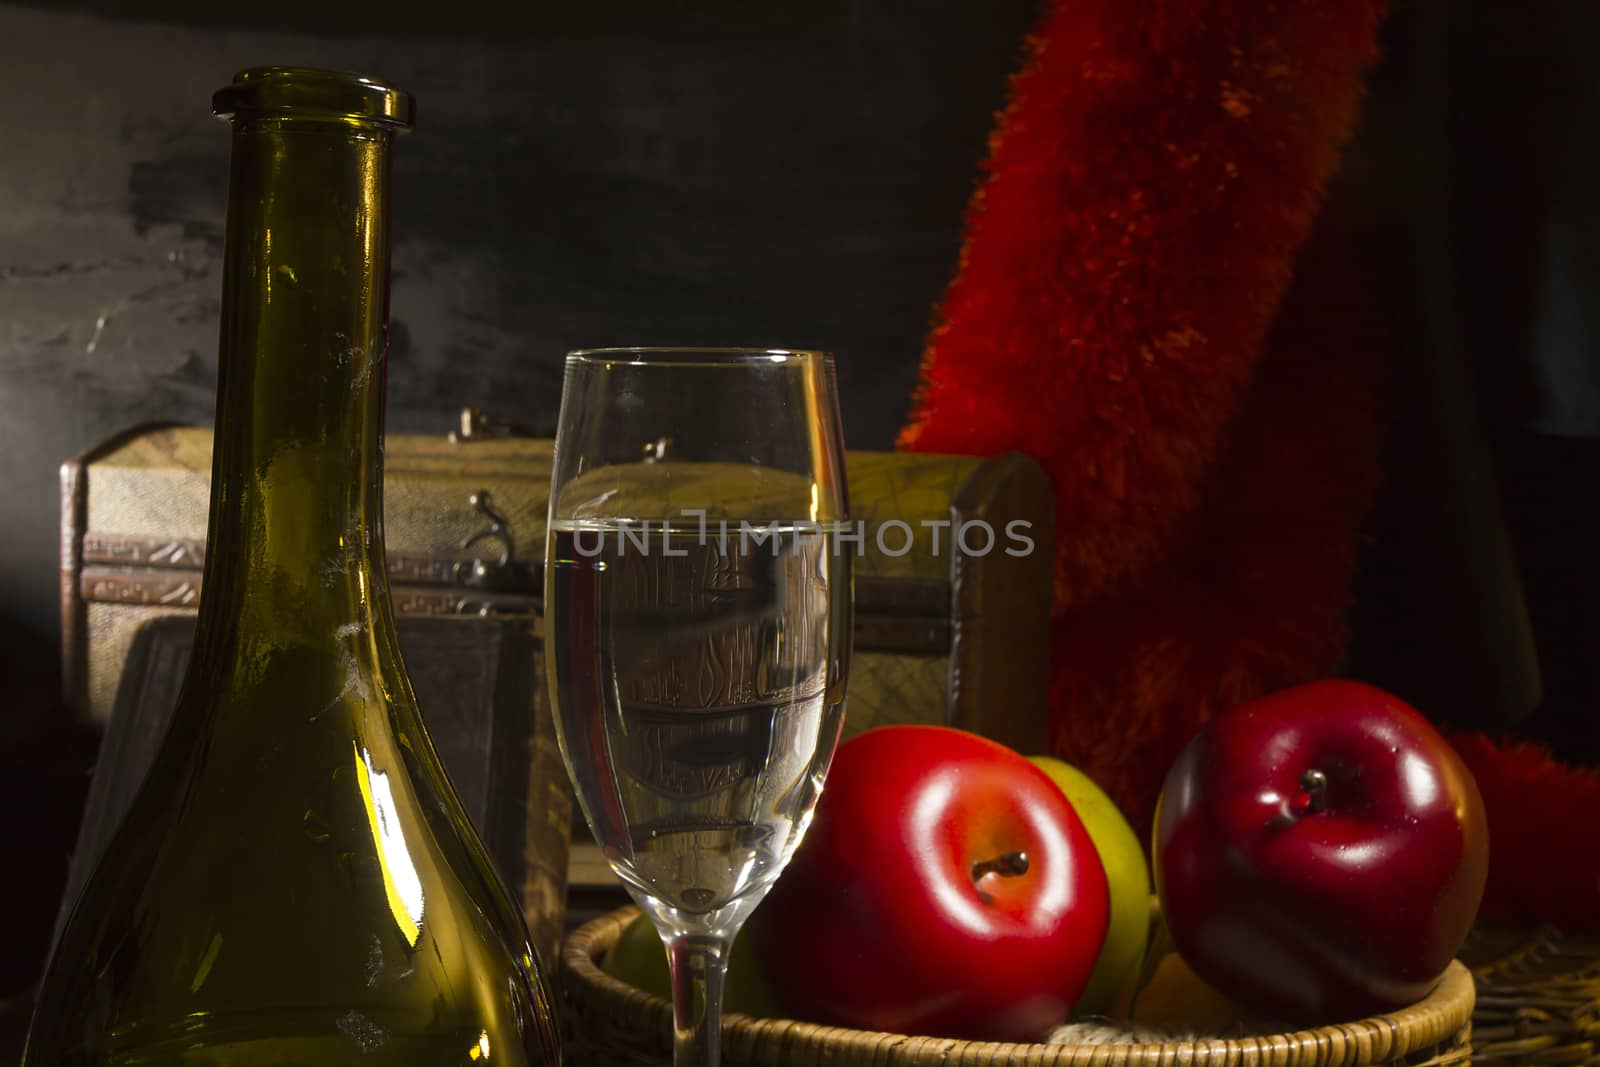 Vintage still life with wine and apples